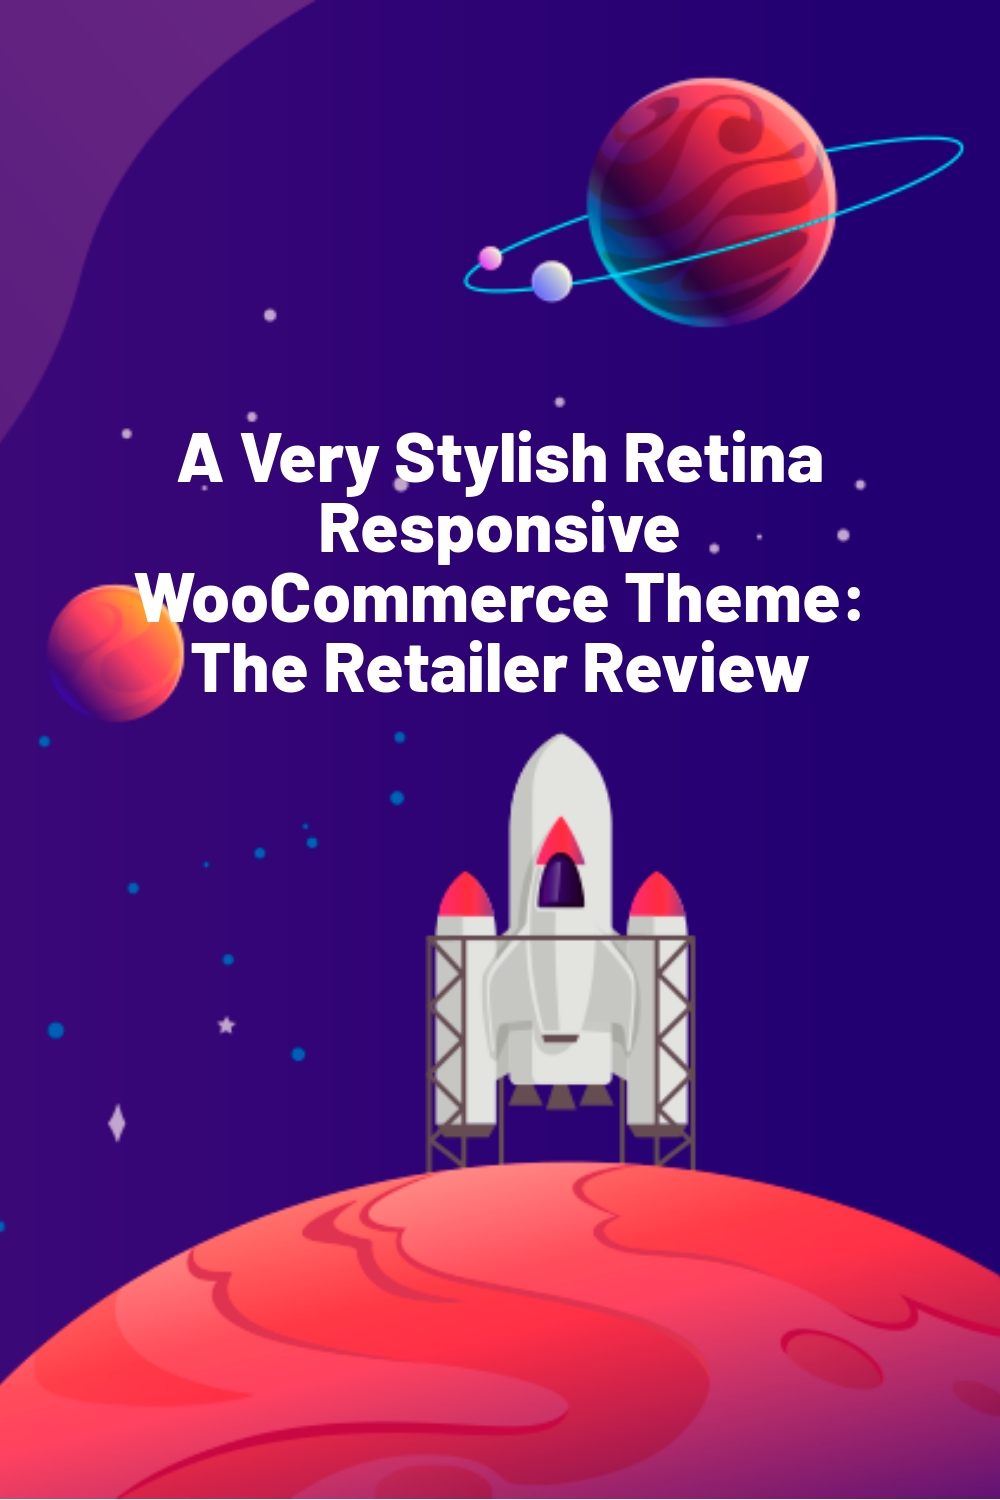 A Very Stylish Retina Responsive WooCommerce Theme: The Retailer Review